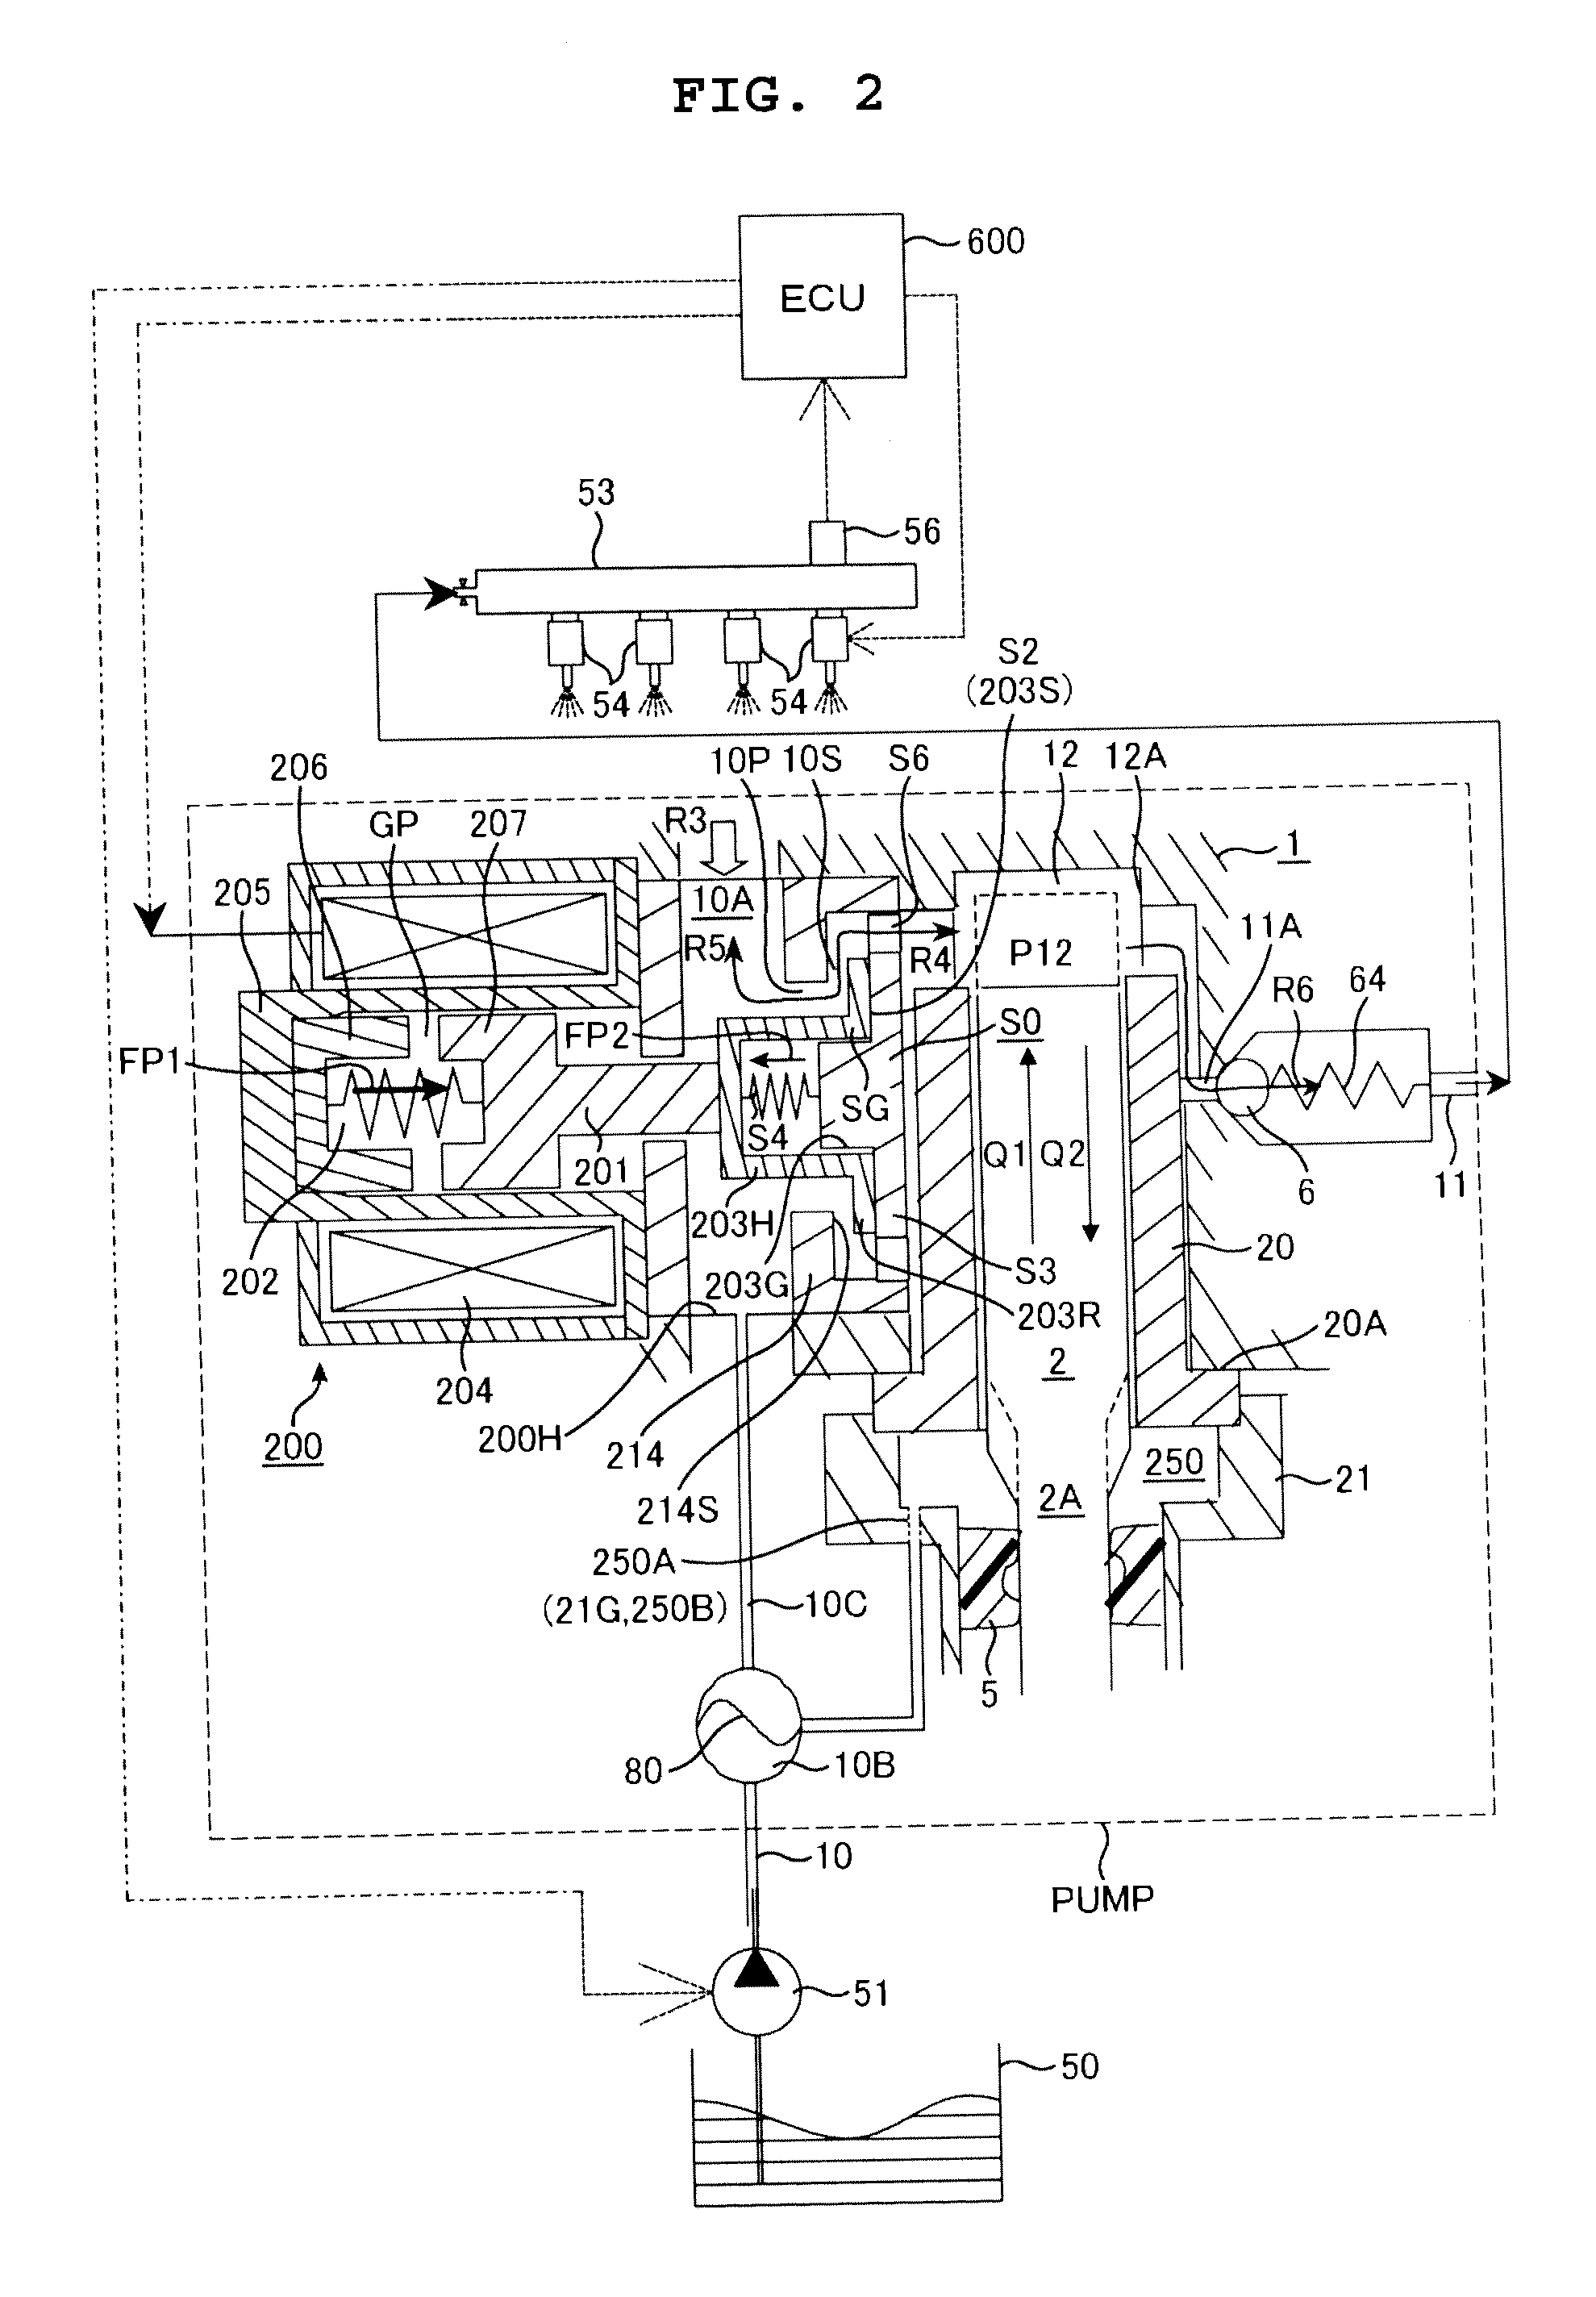 Control method of magnetic solenoid valve, control method of electromagnetically controlled inlet valve of high pressure fuel pump, and control device for electromagnetic actuator of electromagnetically controlled inlet valve